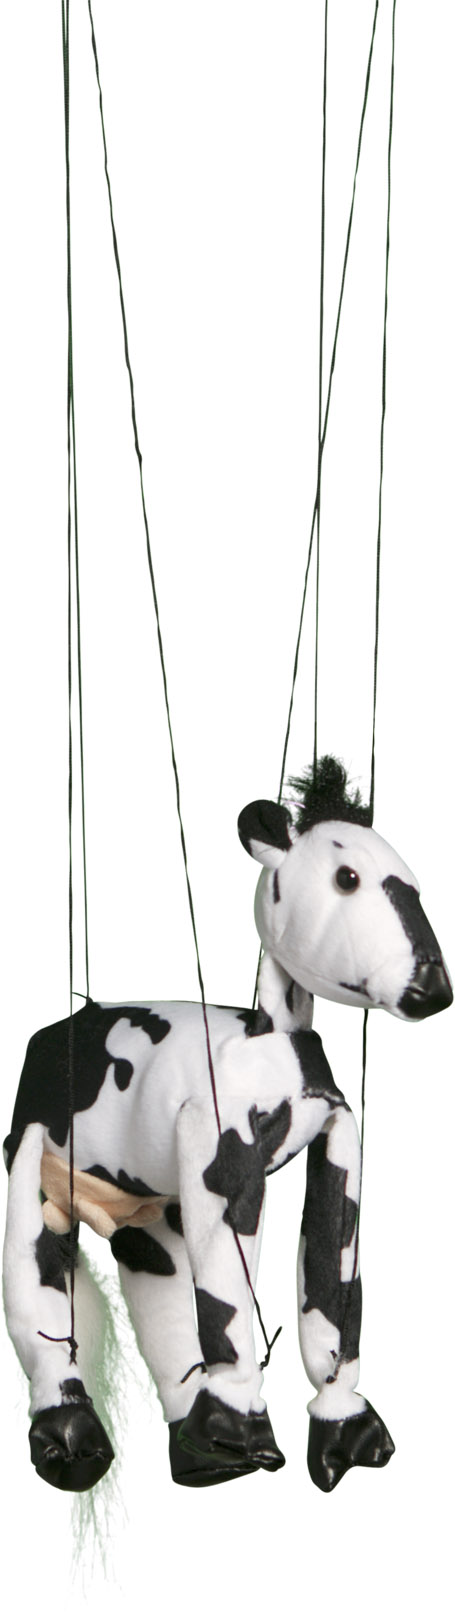 Picture of Sunny Toys WB330 16 In. Baby Cow- Marionette Puppet